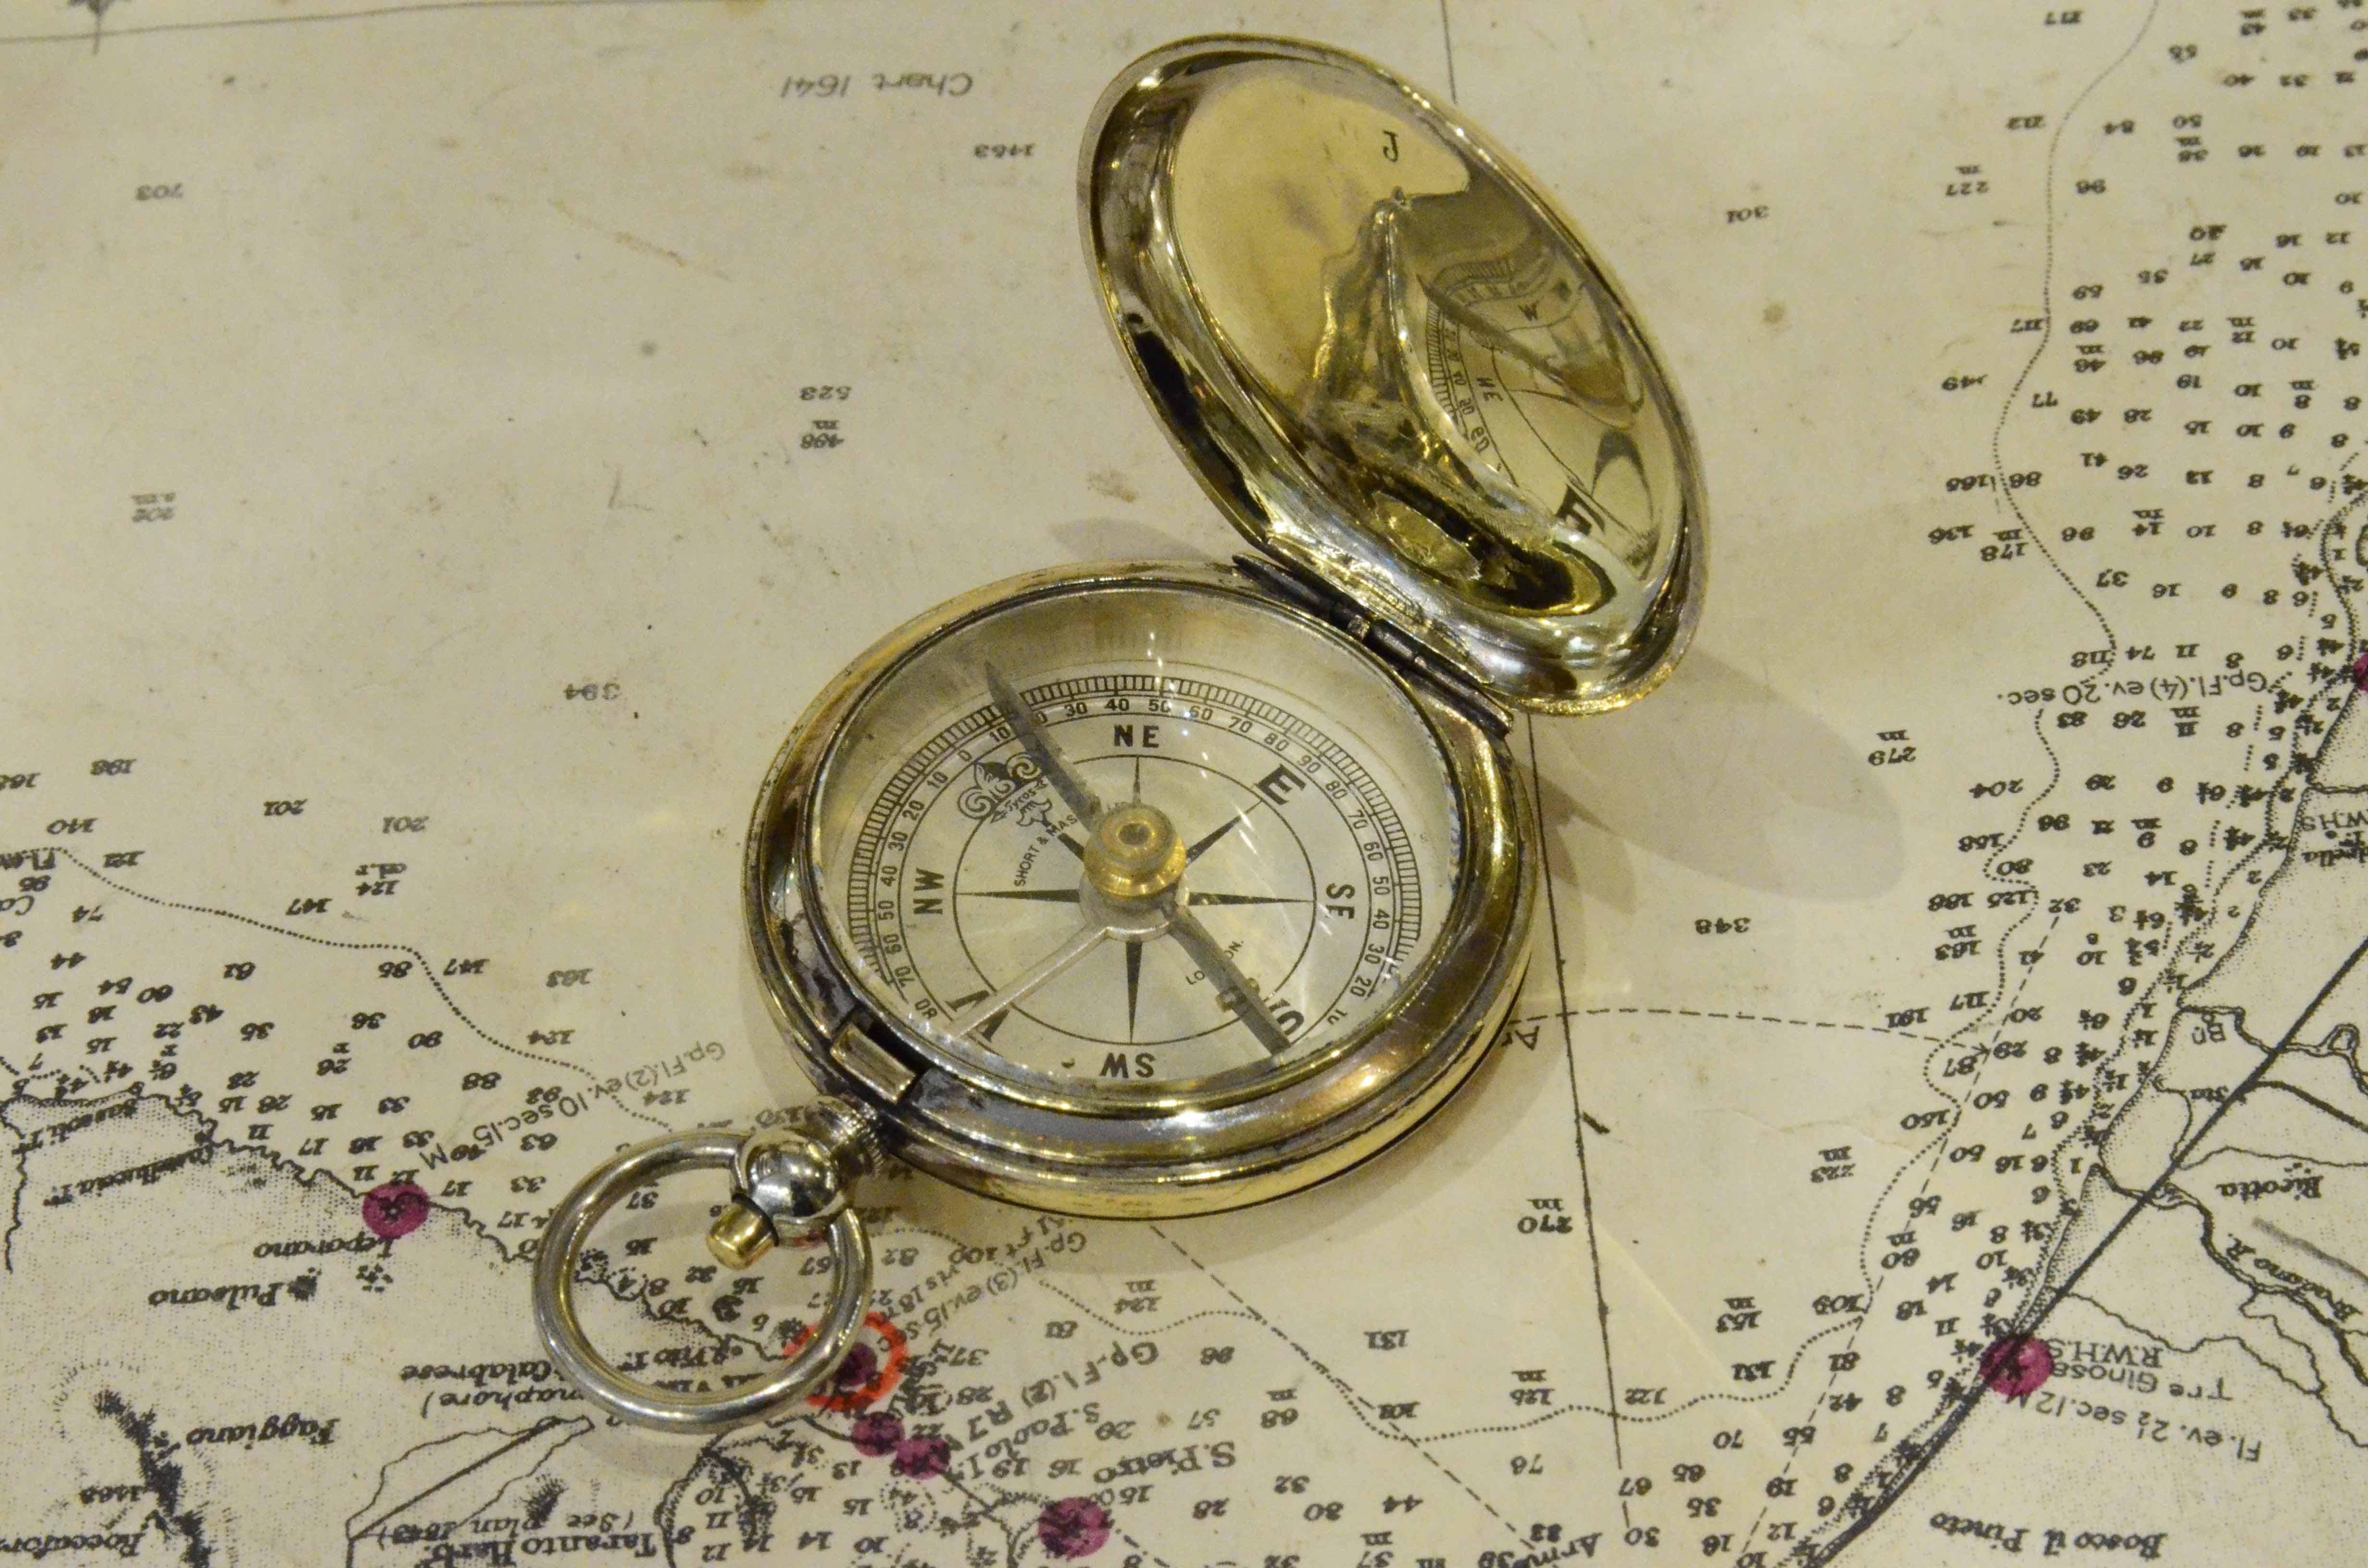 Pocket compass used by British Army officers during World War I in 1915 of brass in the shape of a pocket watch, signed Short & Mason Ltd London. 
The compass is equipped with a lid with snap closure with release button inside the ring. Eight-winds